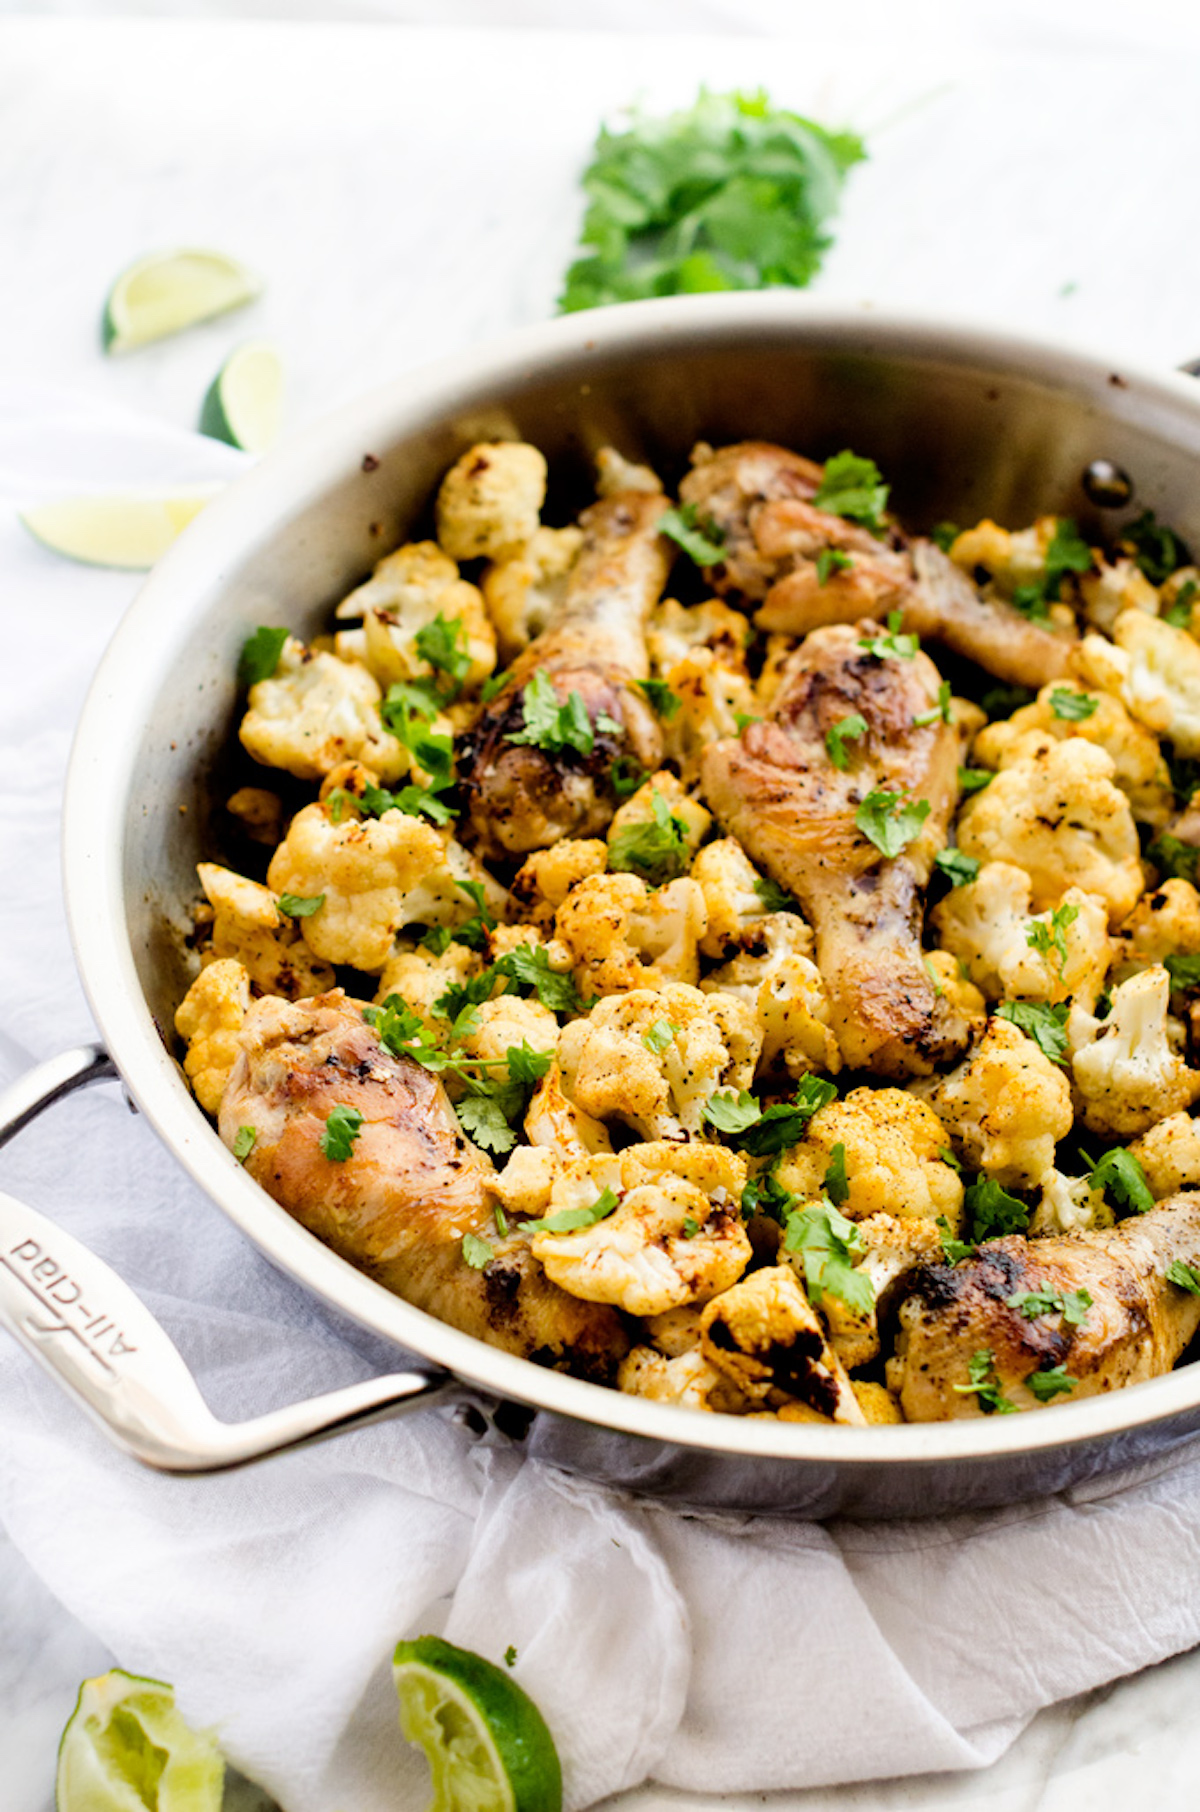 Chicken and cauliflower in a skillet garnished with parsely.